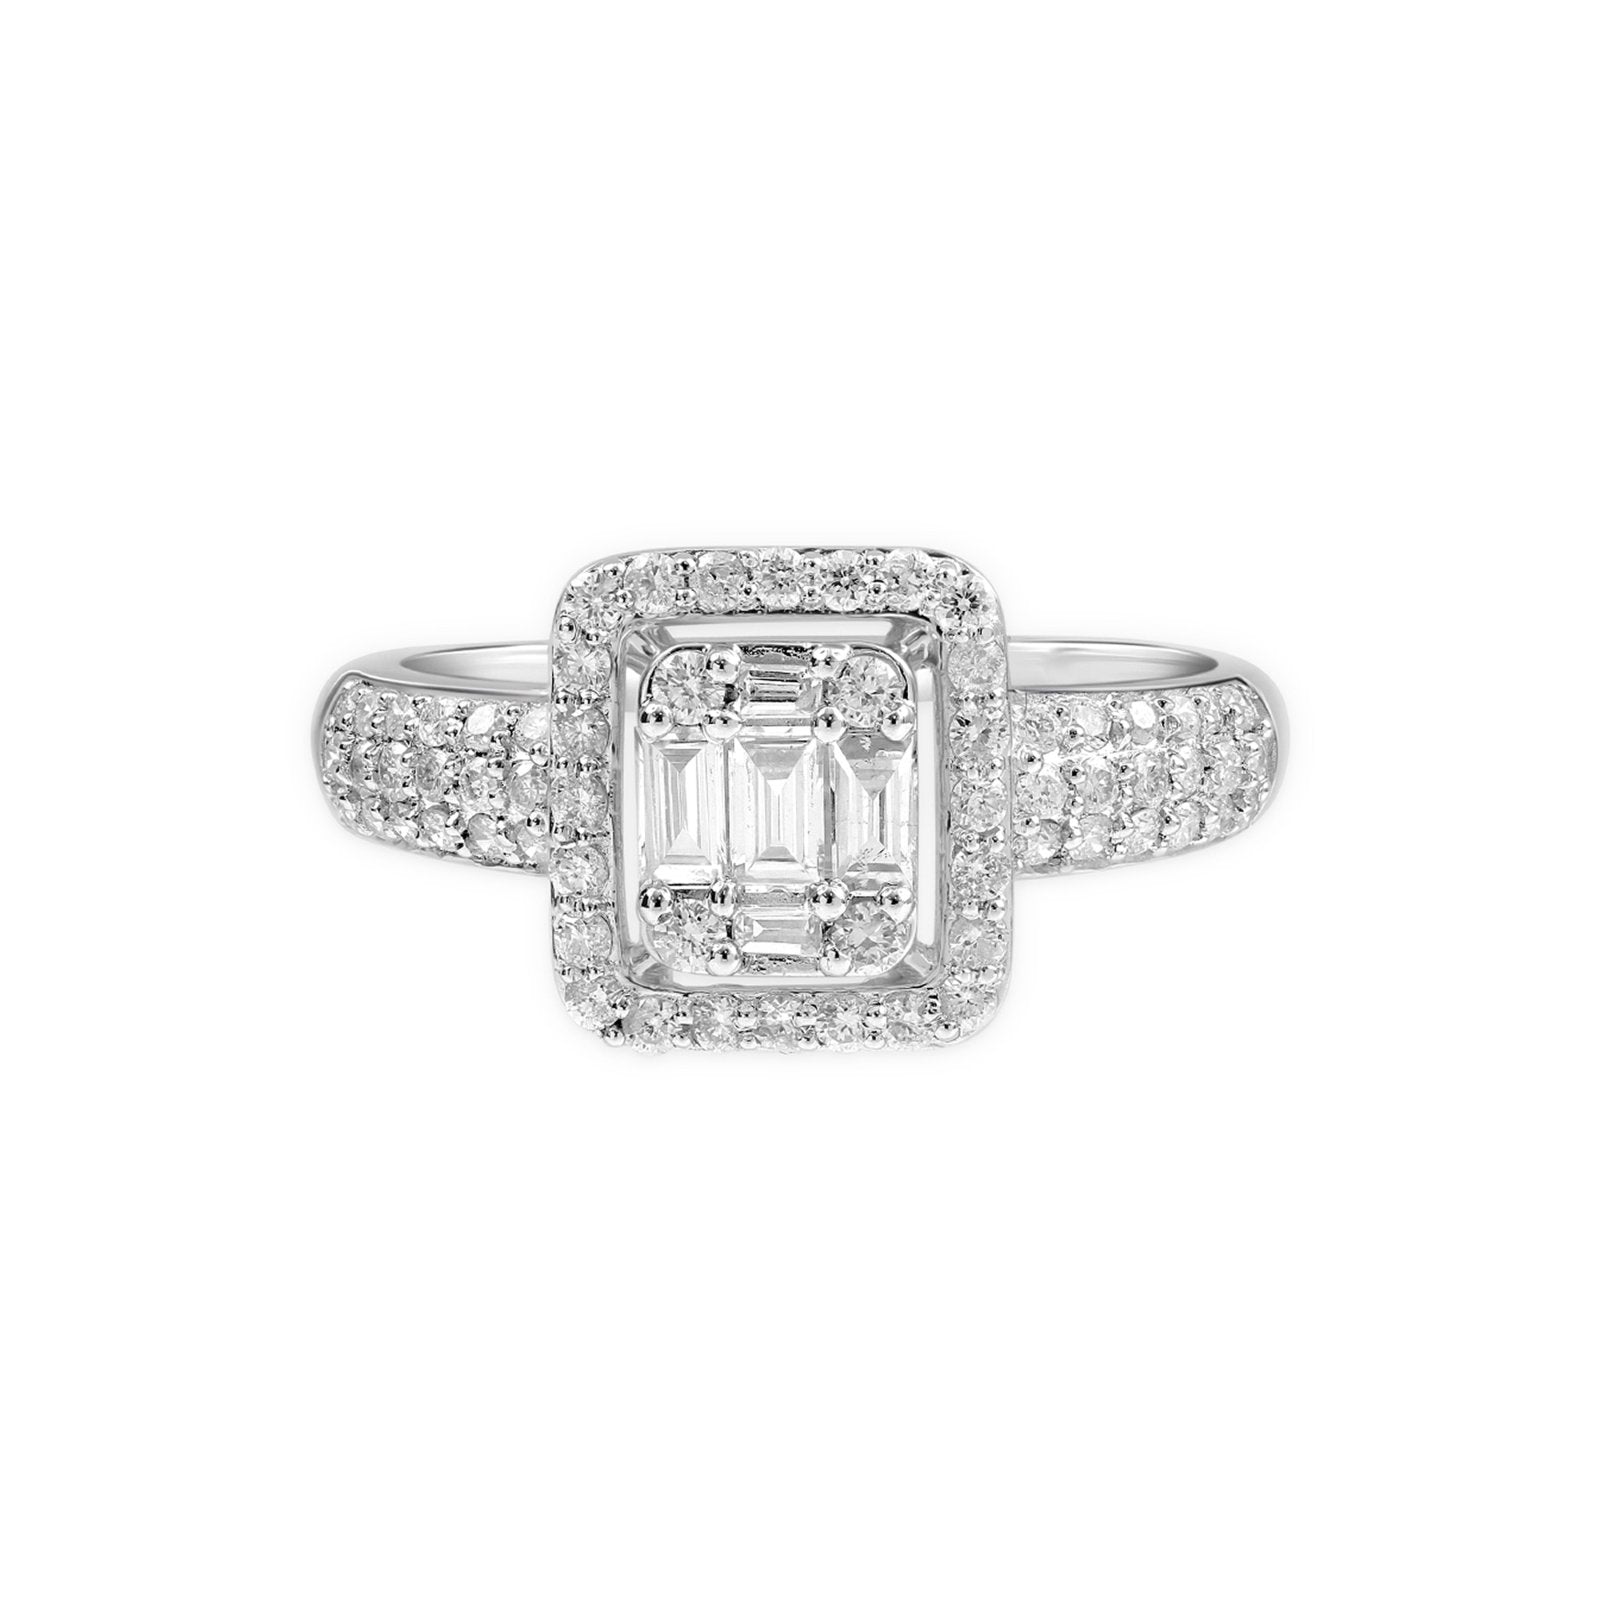 Diamond Baguette with Halo Ring in Solid 18k White Gold Rings Estella Collection #product_description# 17469 18k Colorless Gemstone Diamond #tag4# #tag5# #tag6# #tag7# #tag8# #tag9# #tag10# 6